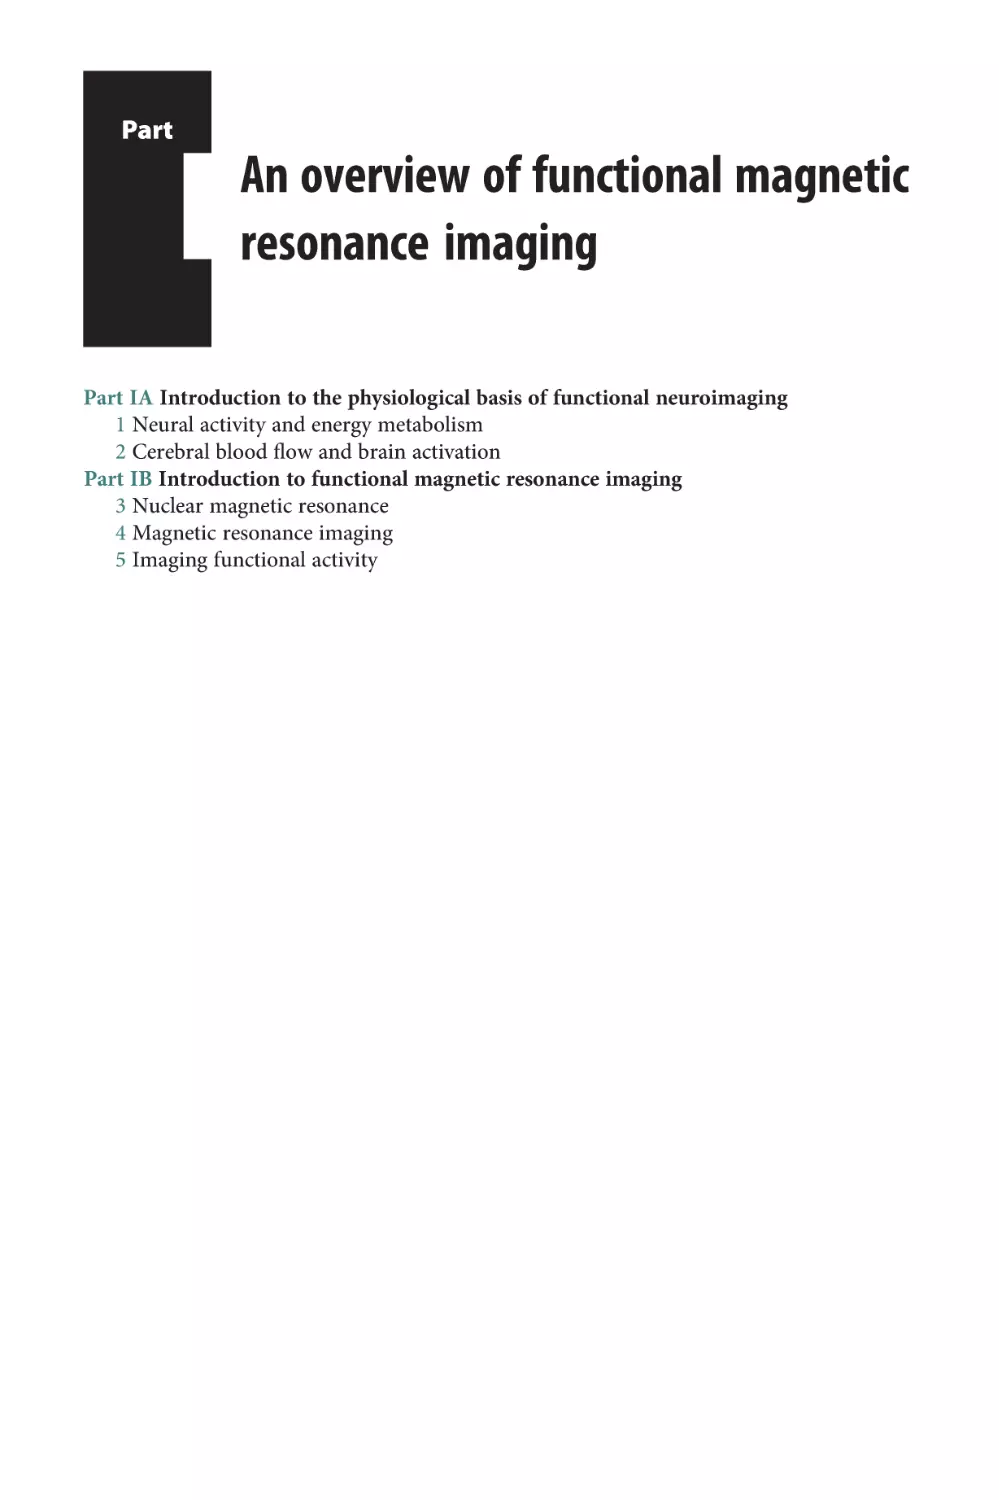 Part I An overview of functional magnetic resonance imaging